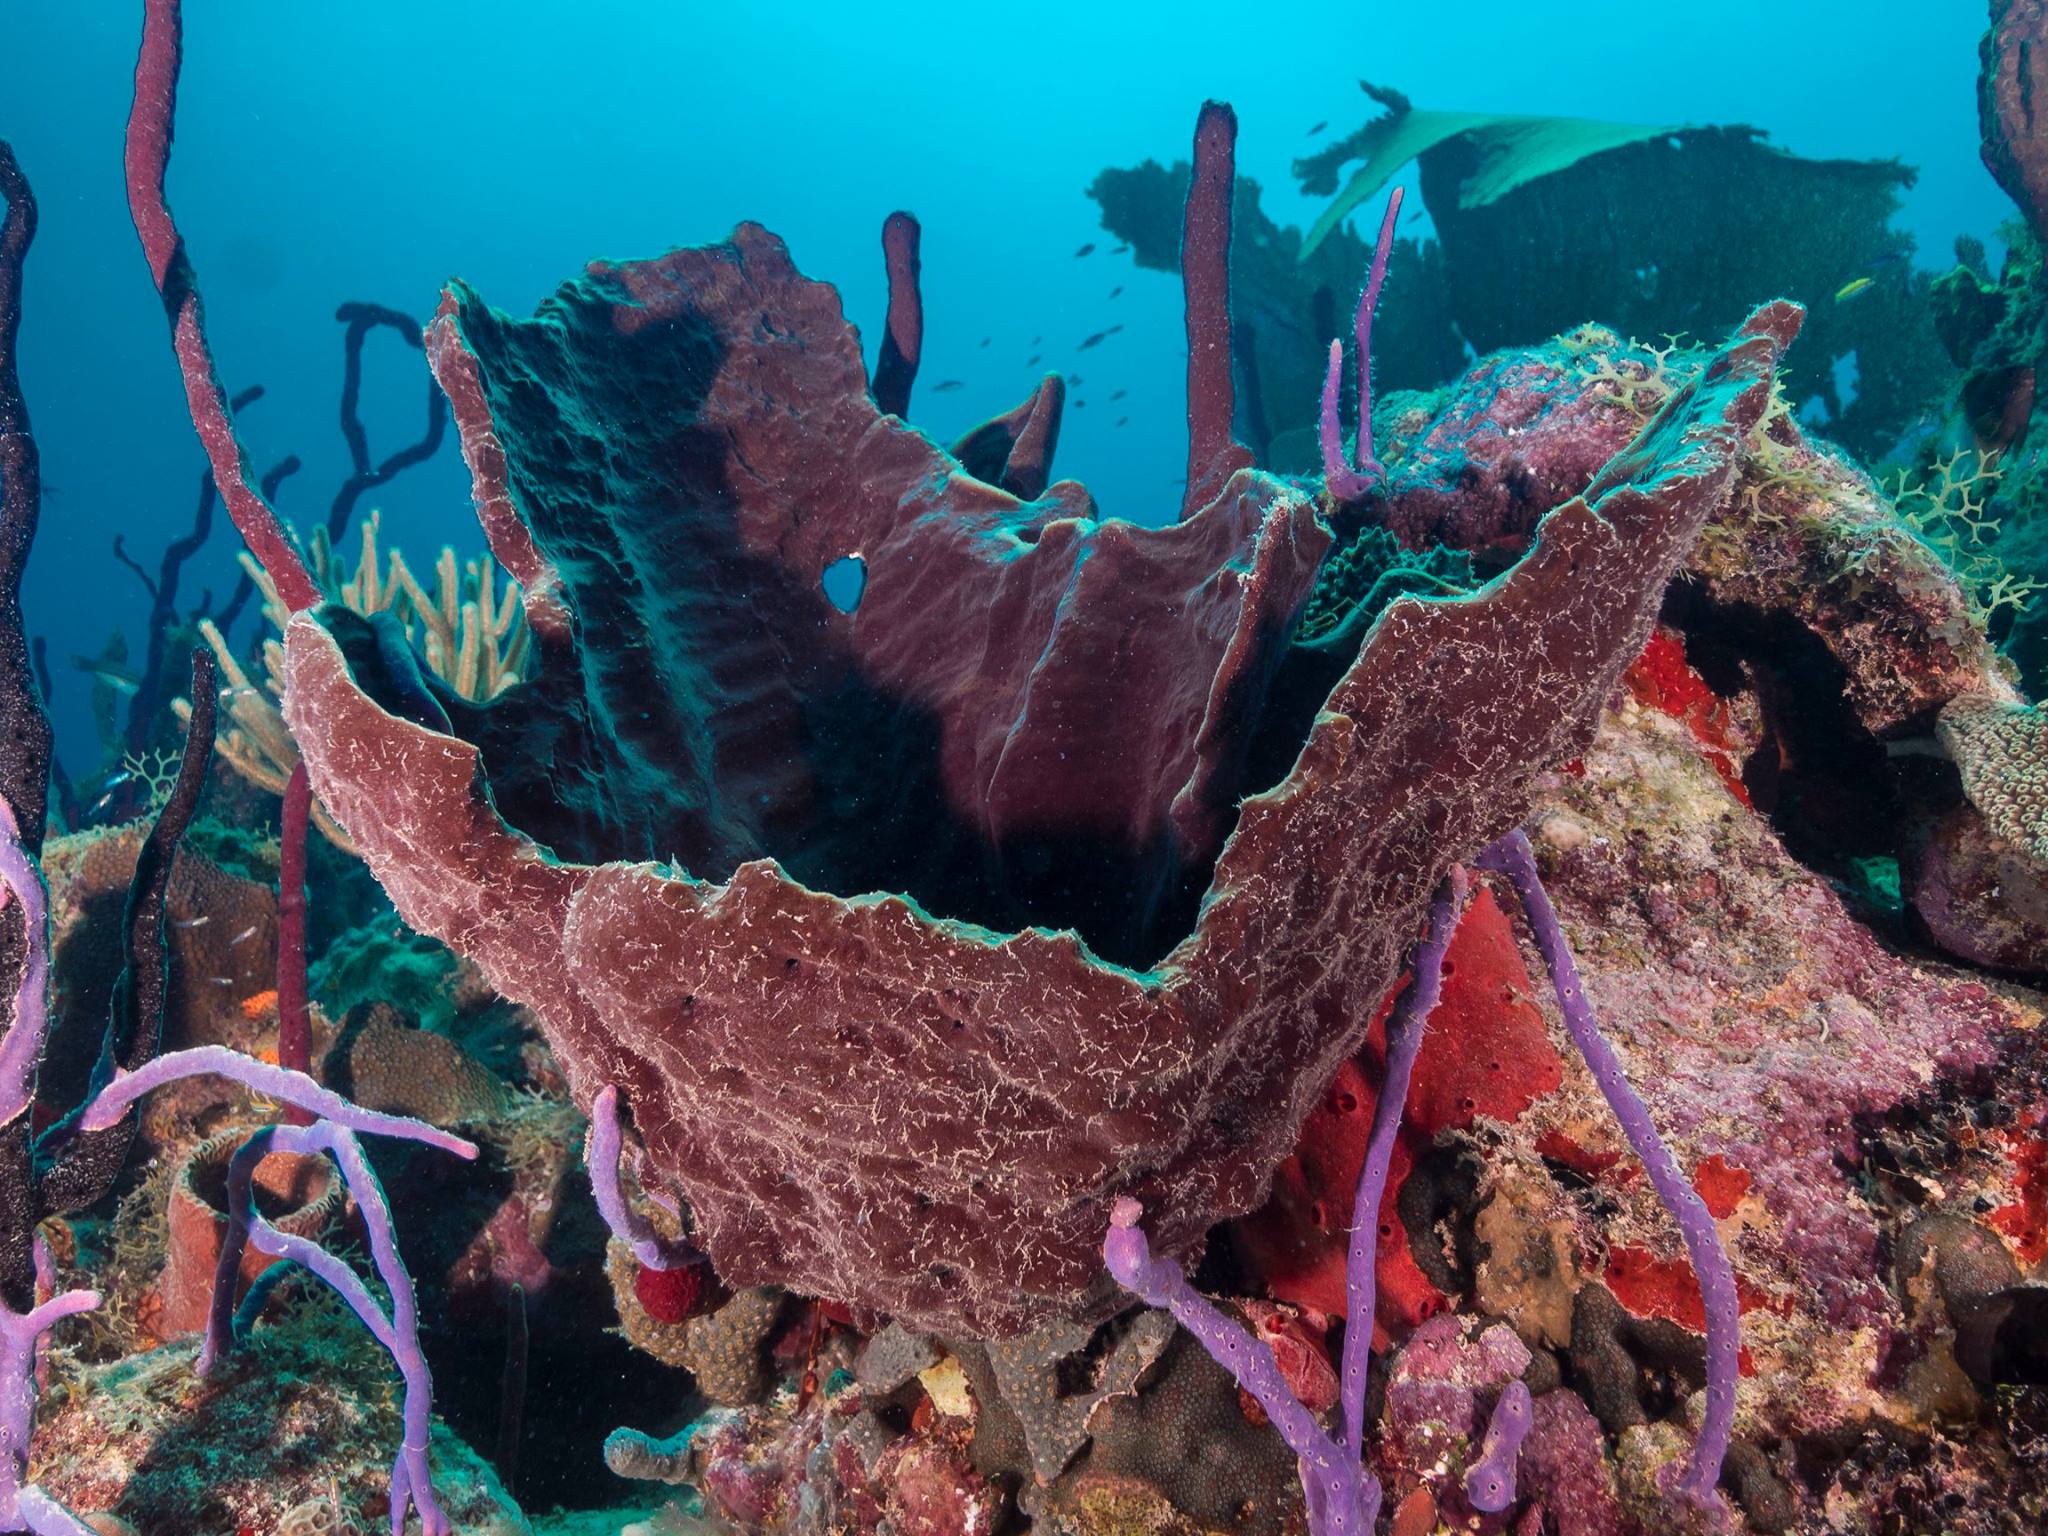 sponges and corals on reef